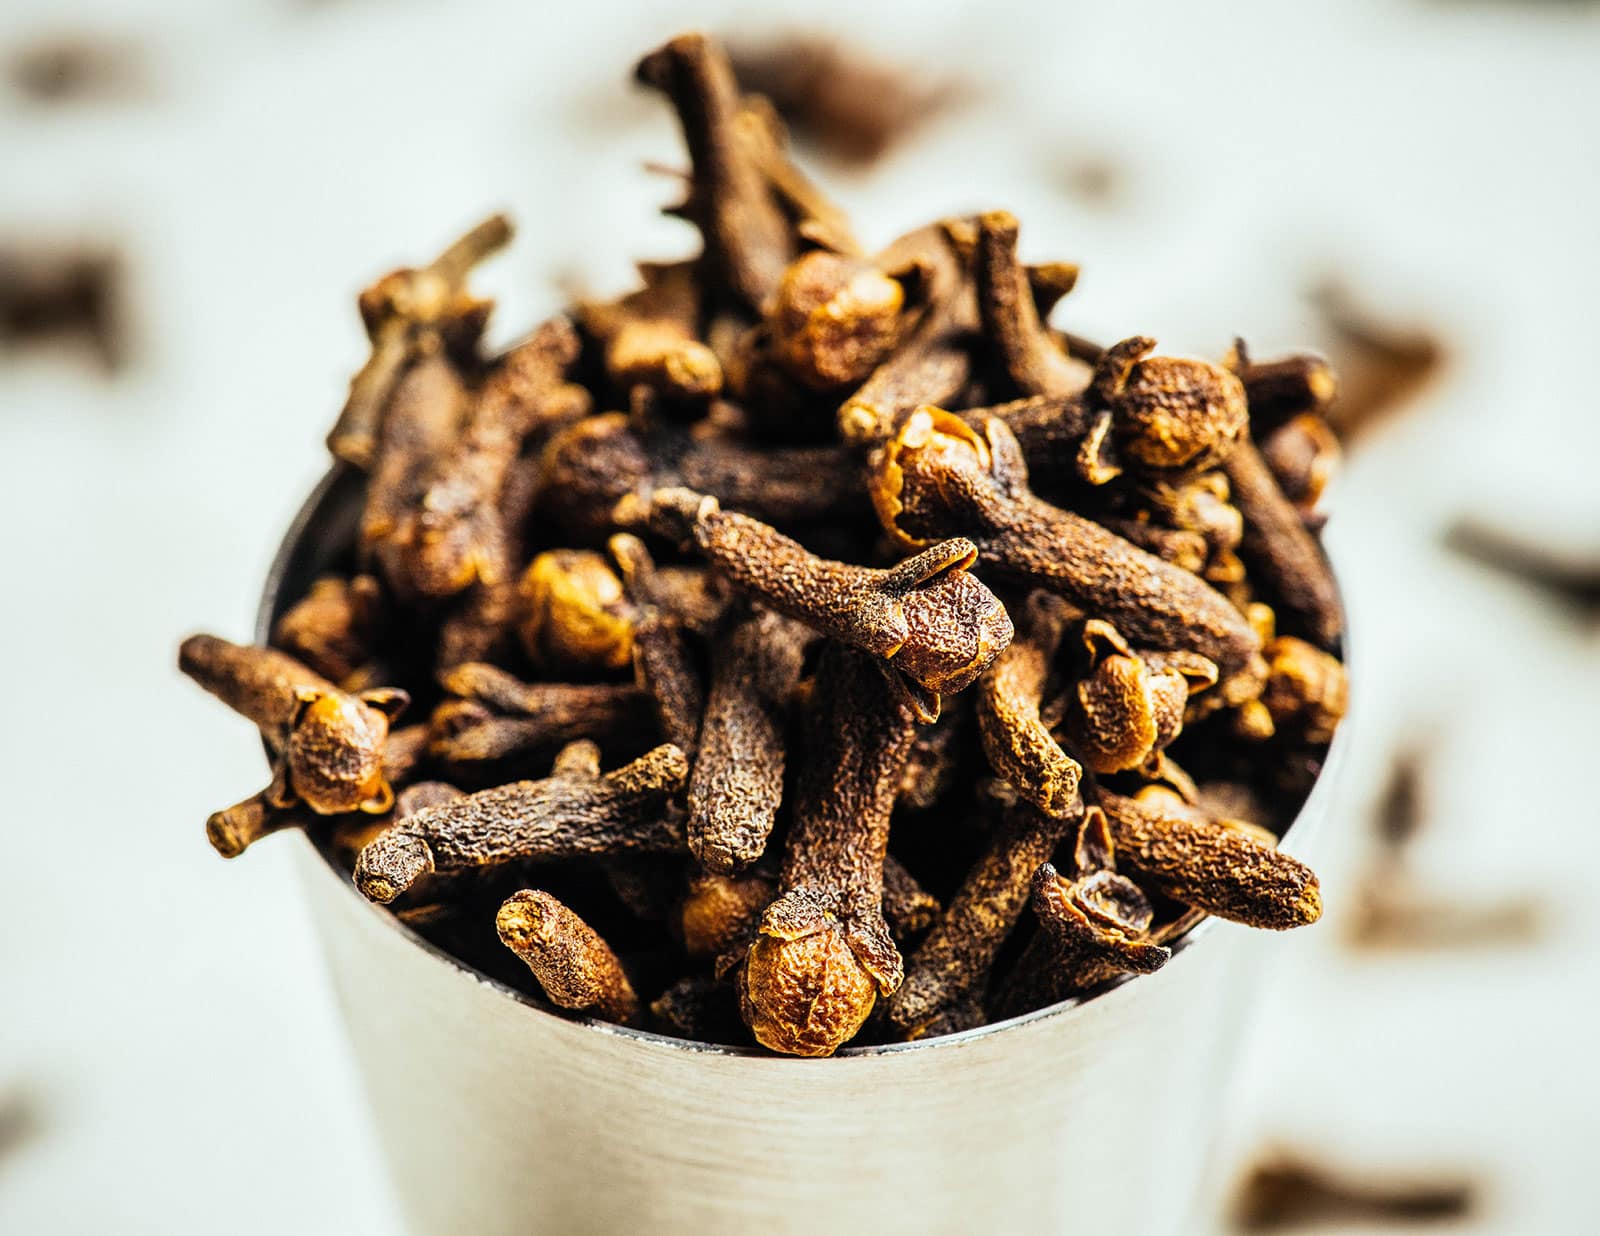 Cup full of cloves